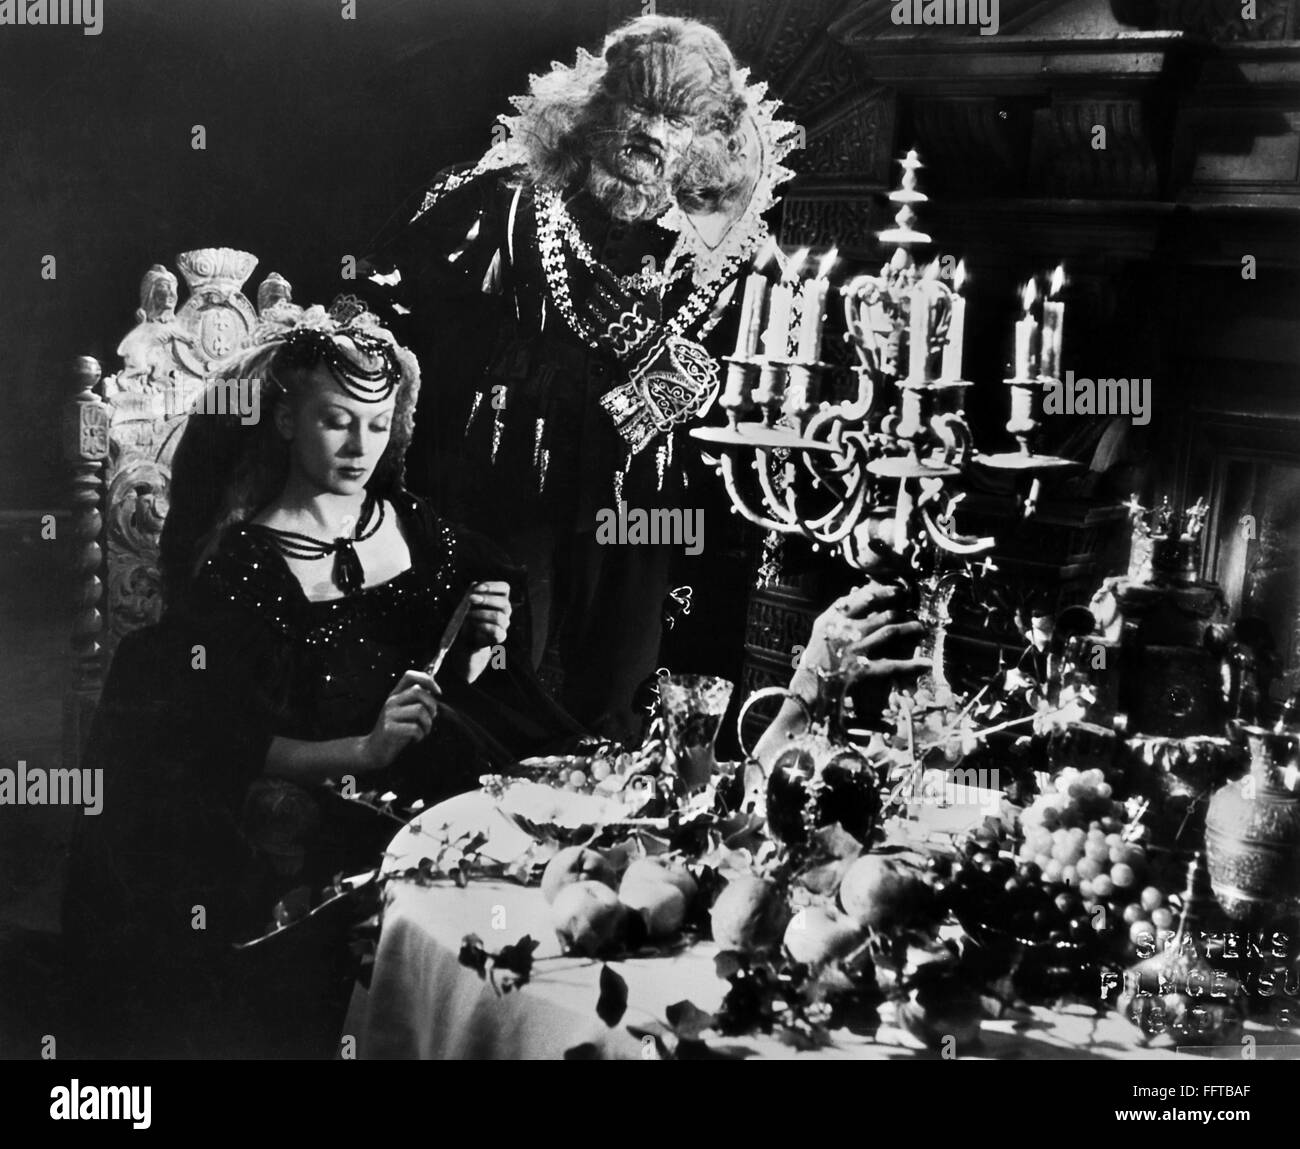 BEAUTY AND THE BEAST, 1946. /nJosette Day as Beauty and Jean Marais as the Beast in the 1946 French film directed by Jean Cocteau. Stock Photo